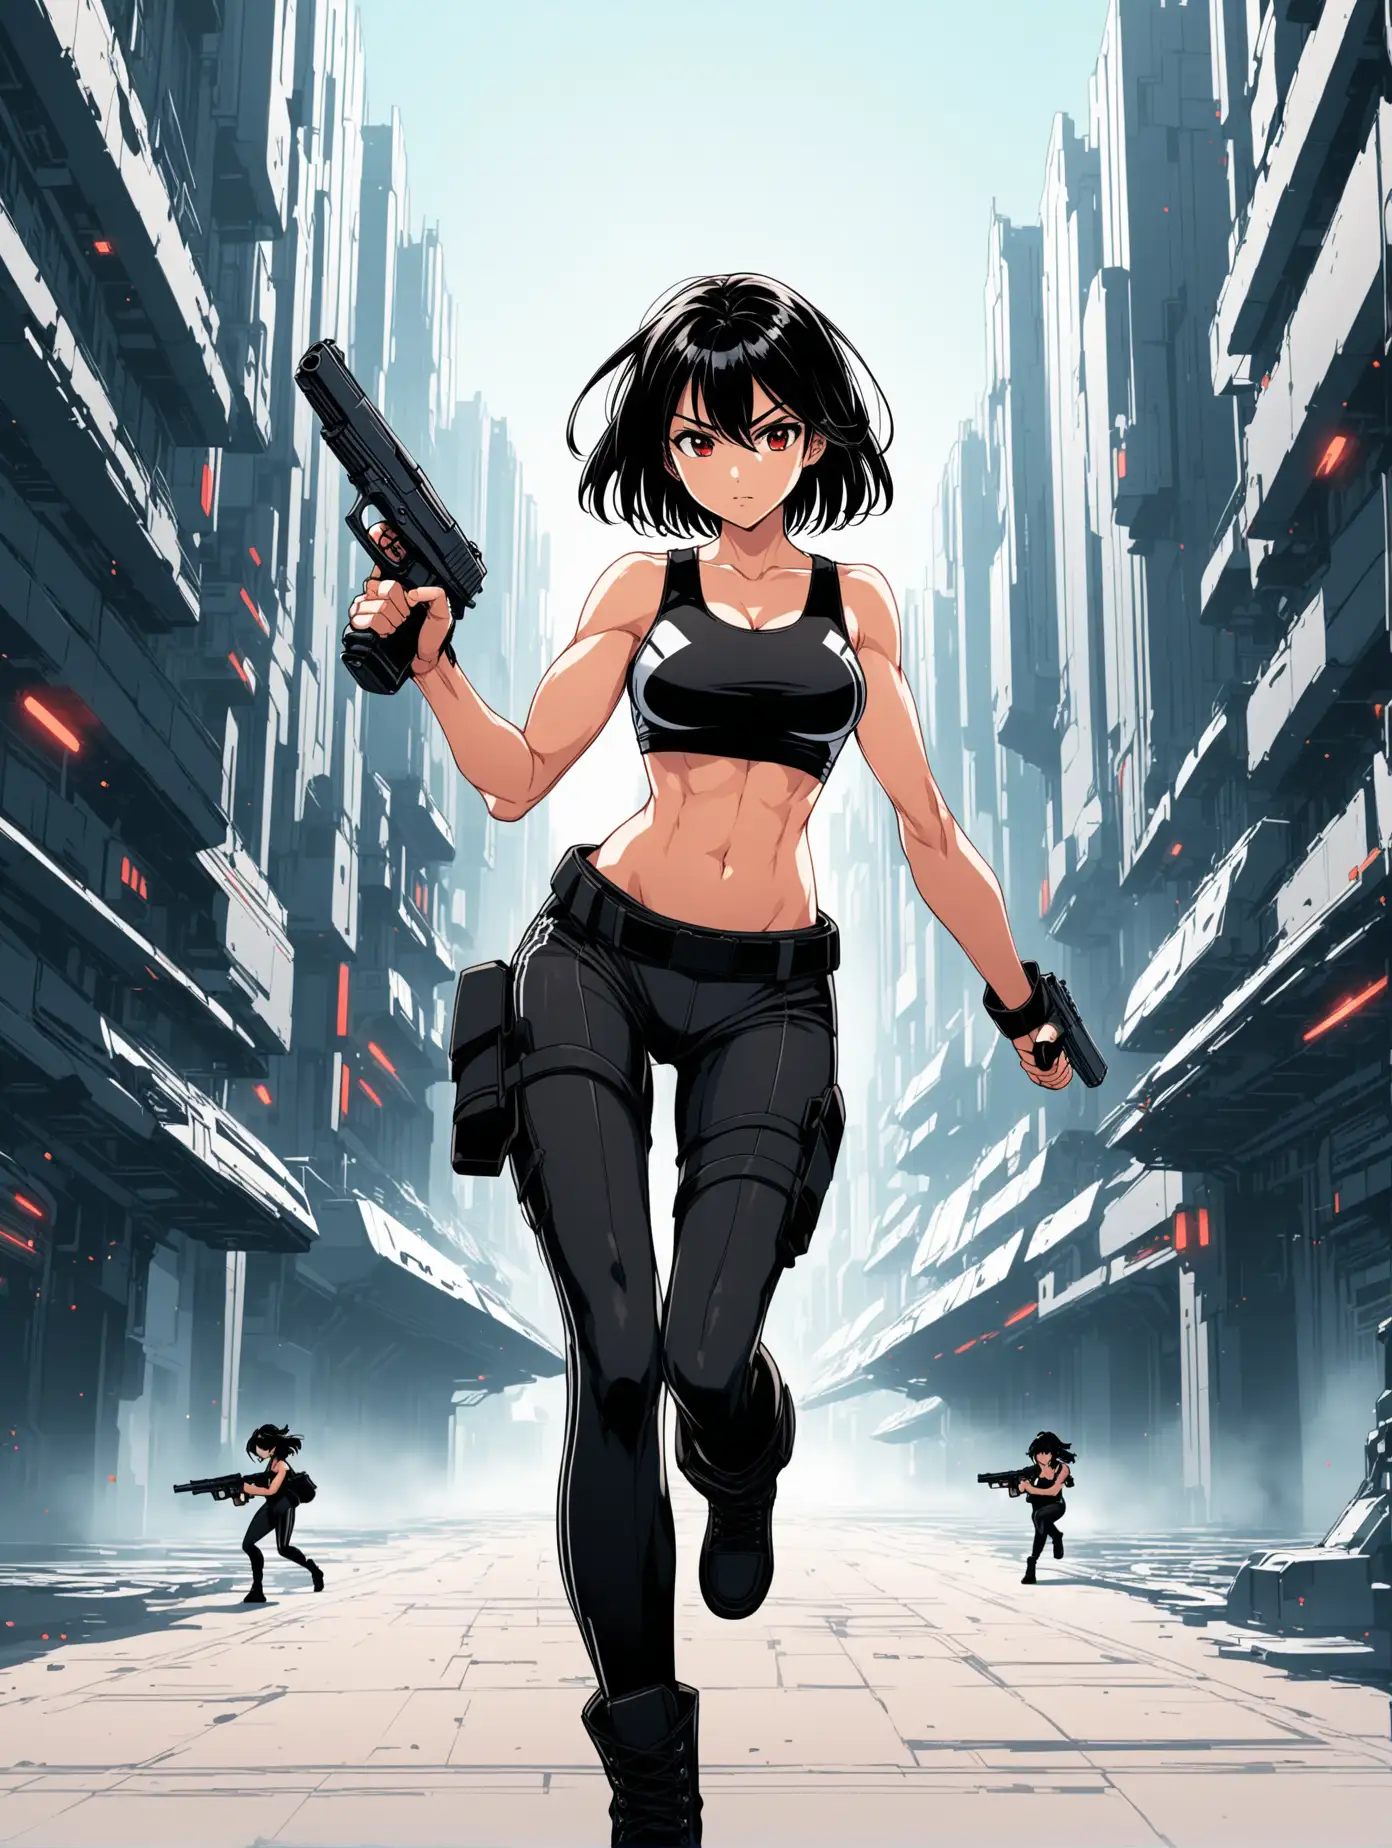 sexy fit 24 year old anime hero girl, short chin length black hair, firing handguns in each hand in futuristic town, toned body, black tank top, black pants, combat boots, red black white 3 color minimal design